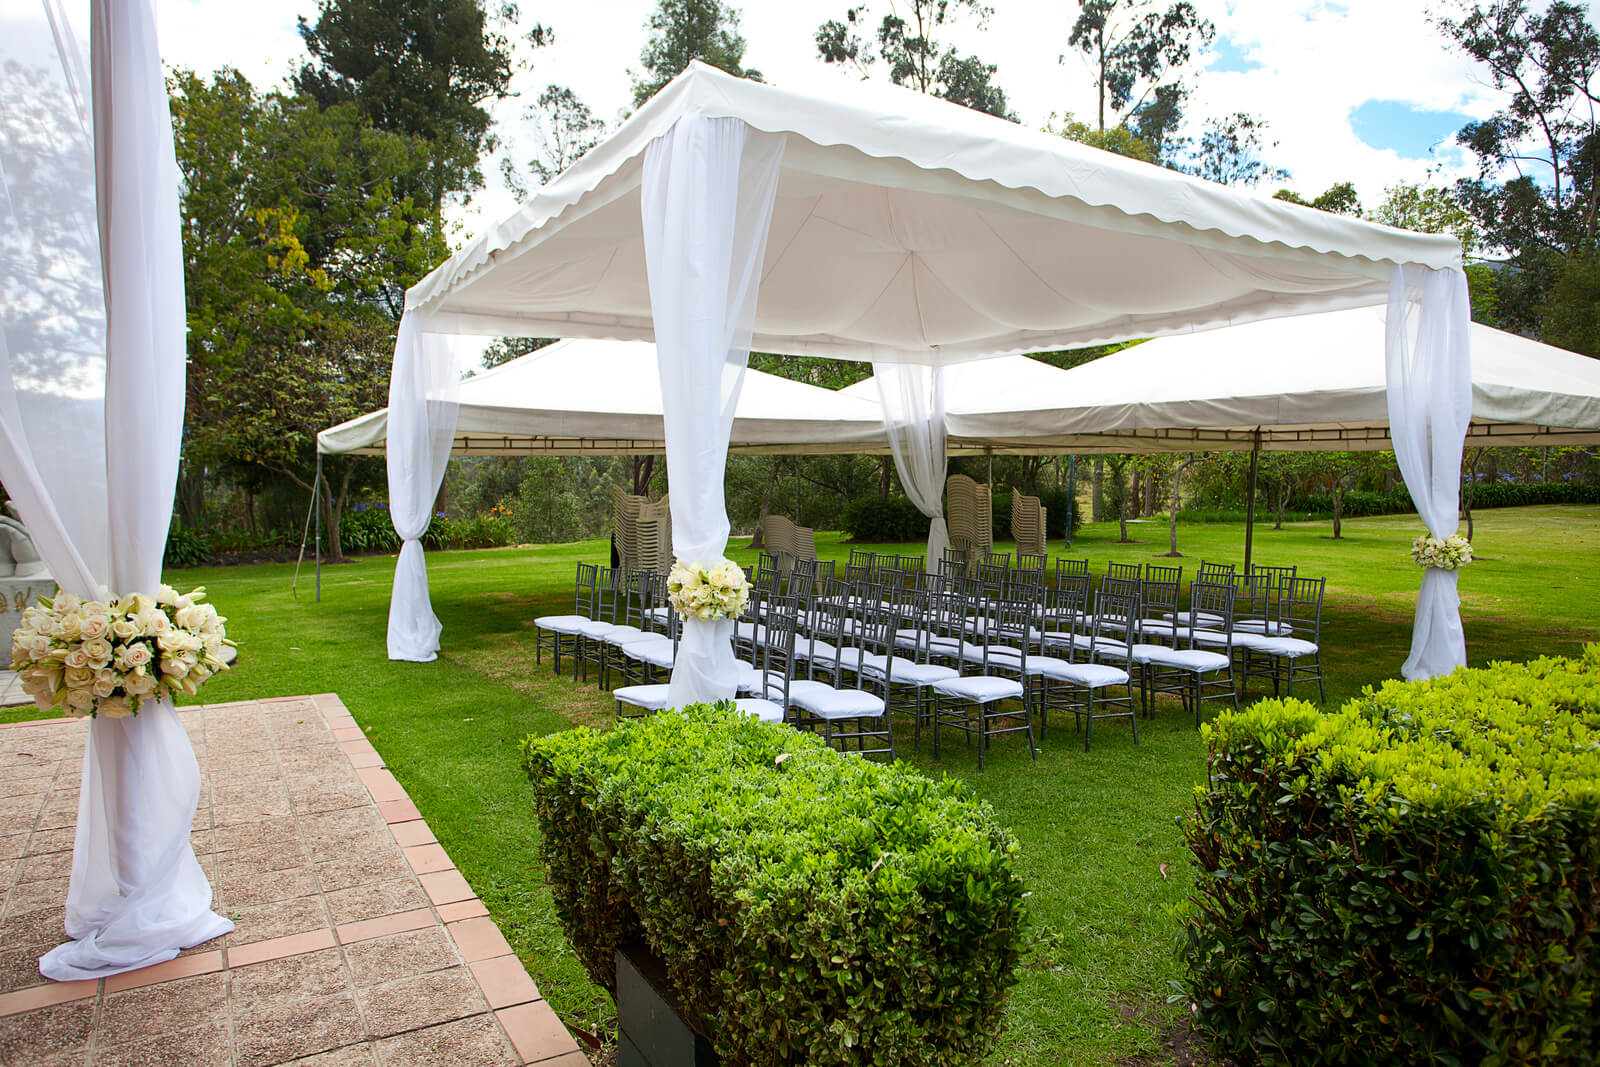 Lawn with surrounding trees and bushes, prepared for a wedding with white drapes, white and grey lawn chairs and small festival tents.